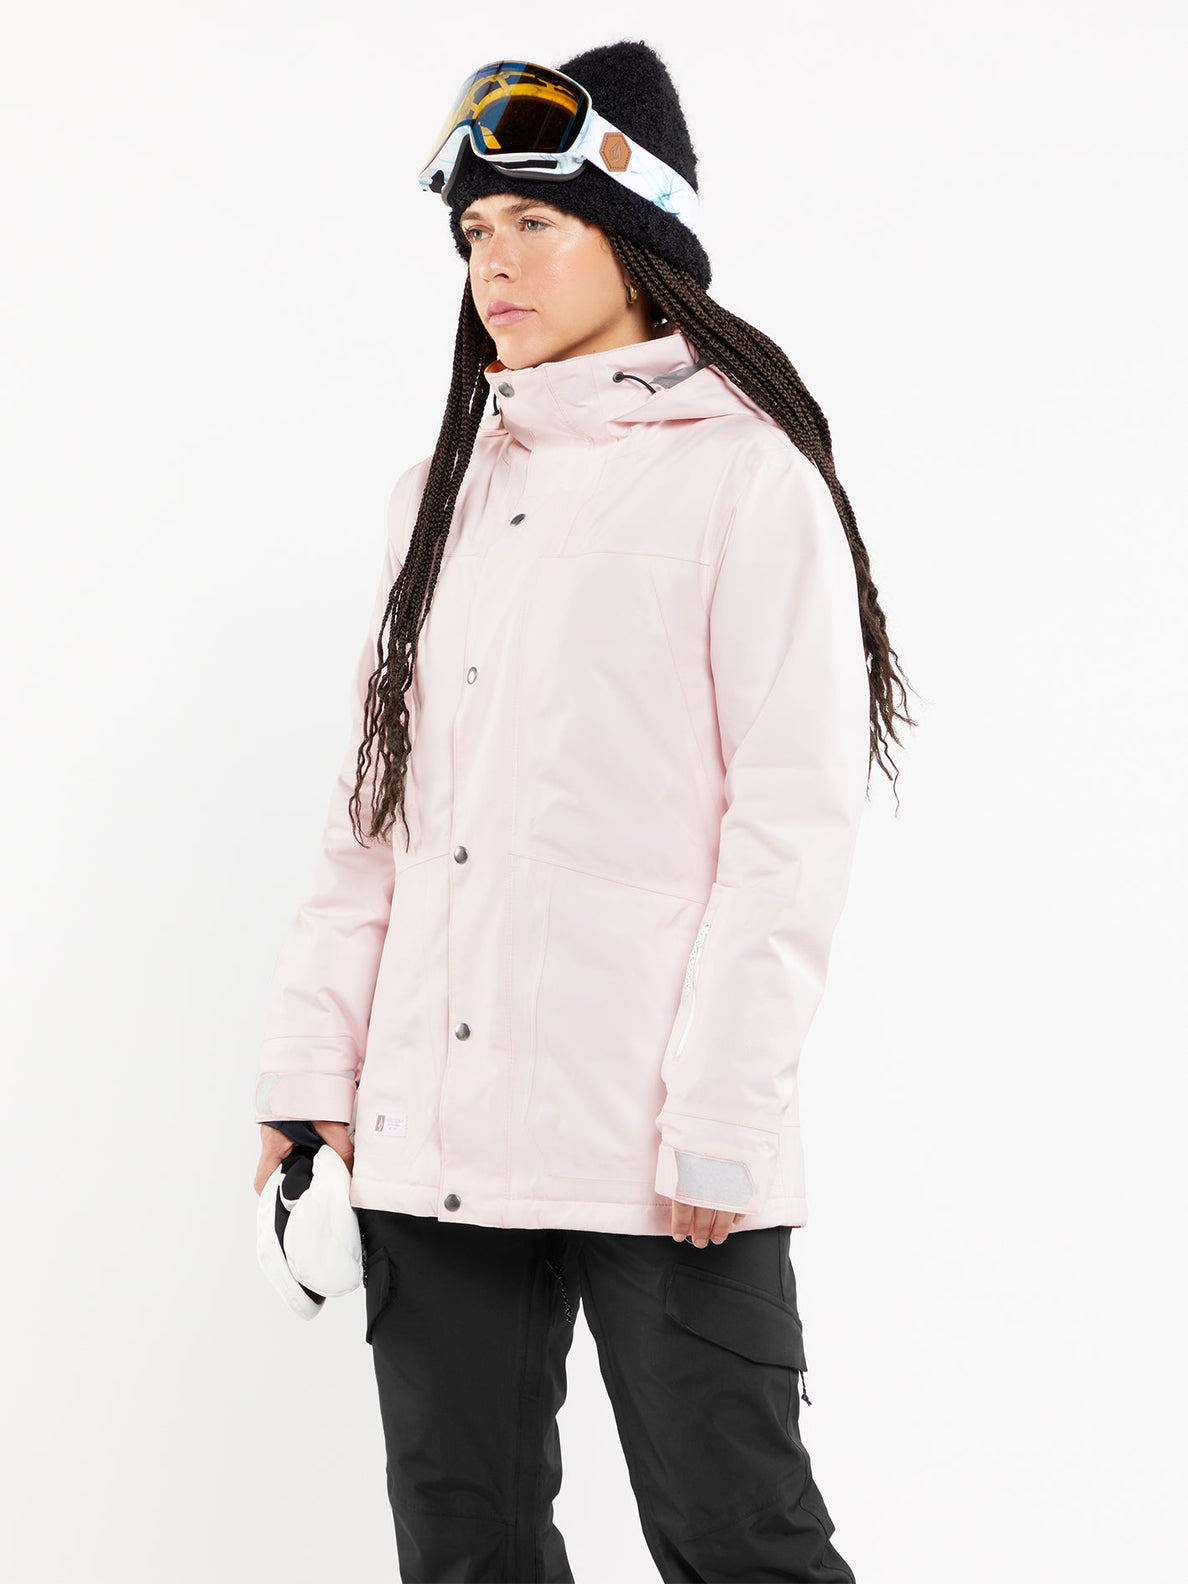 Ell Insulated Gore-Tex Jacket - CALCITE (H0452404_CLT) [48]